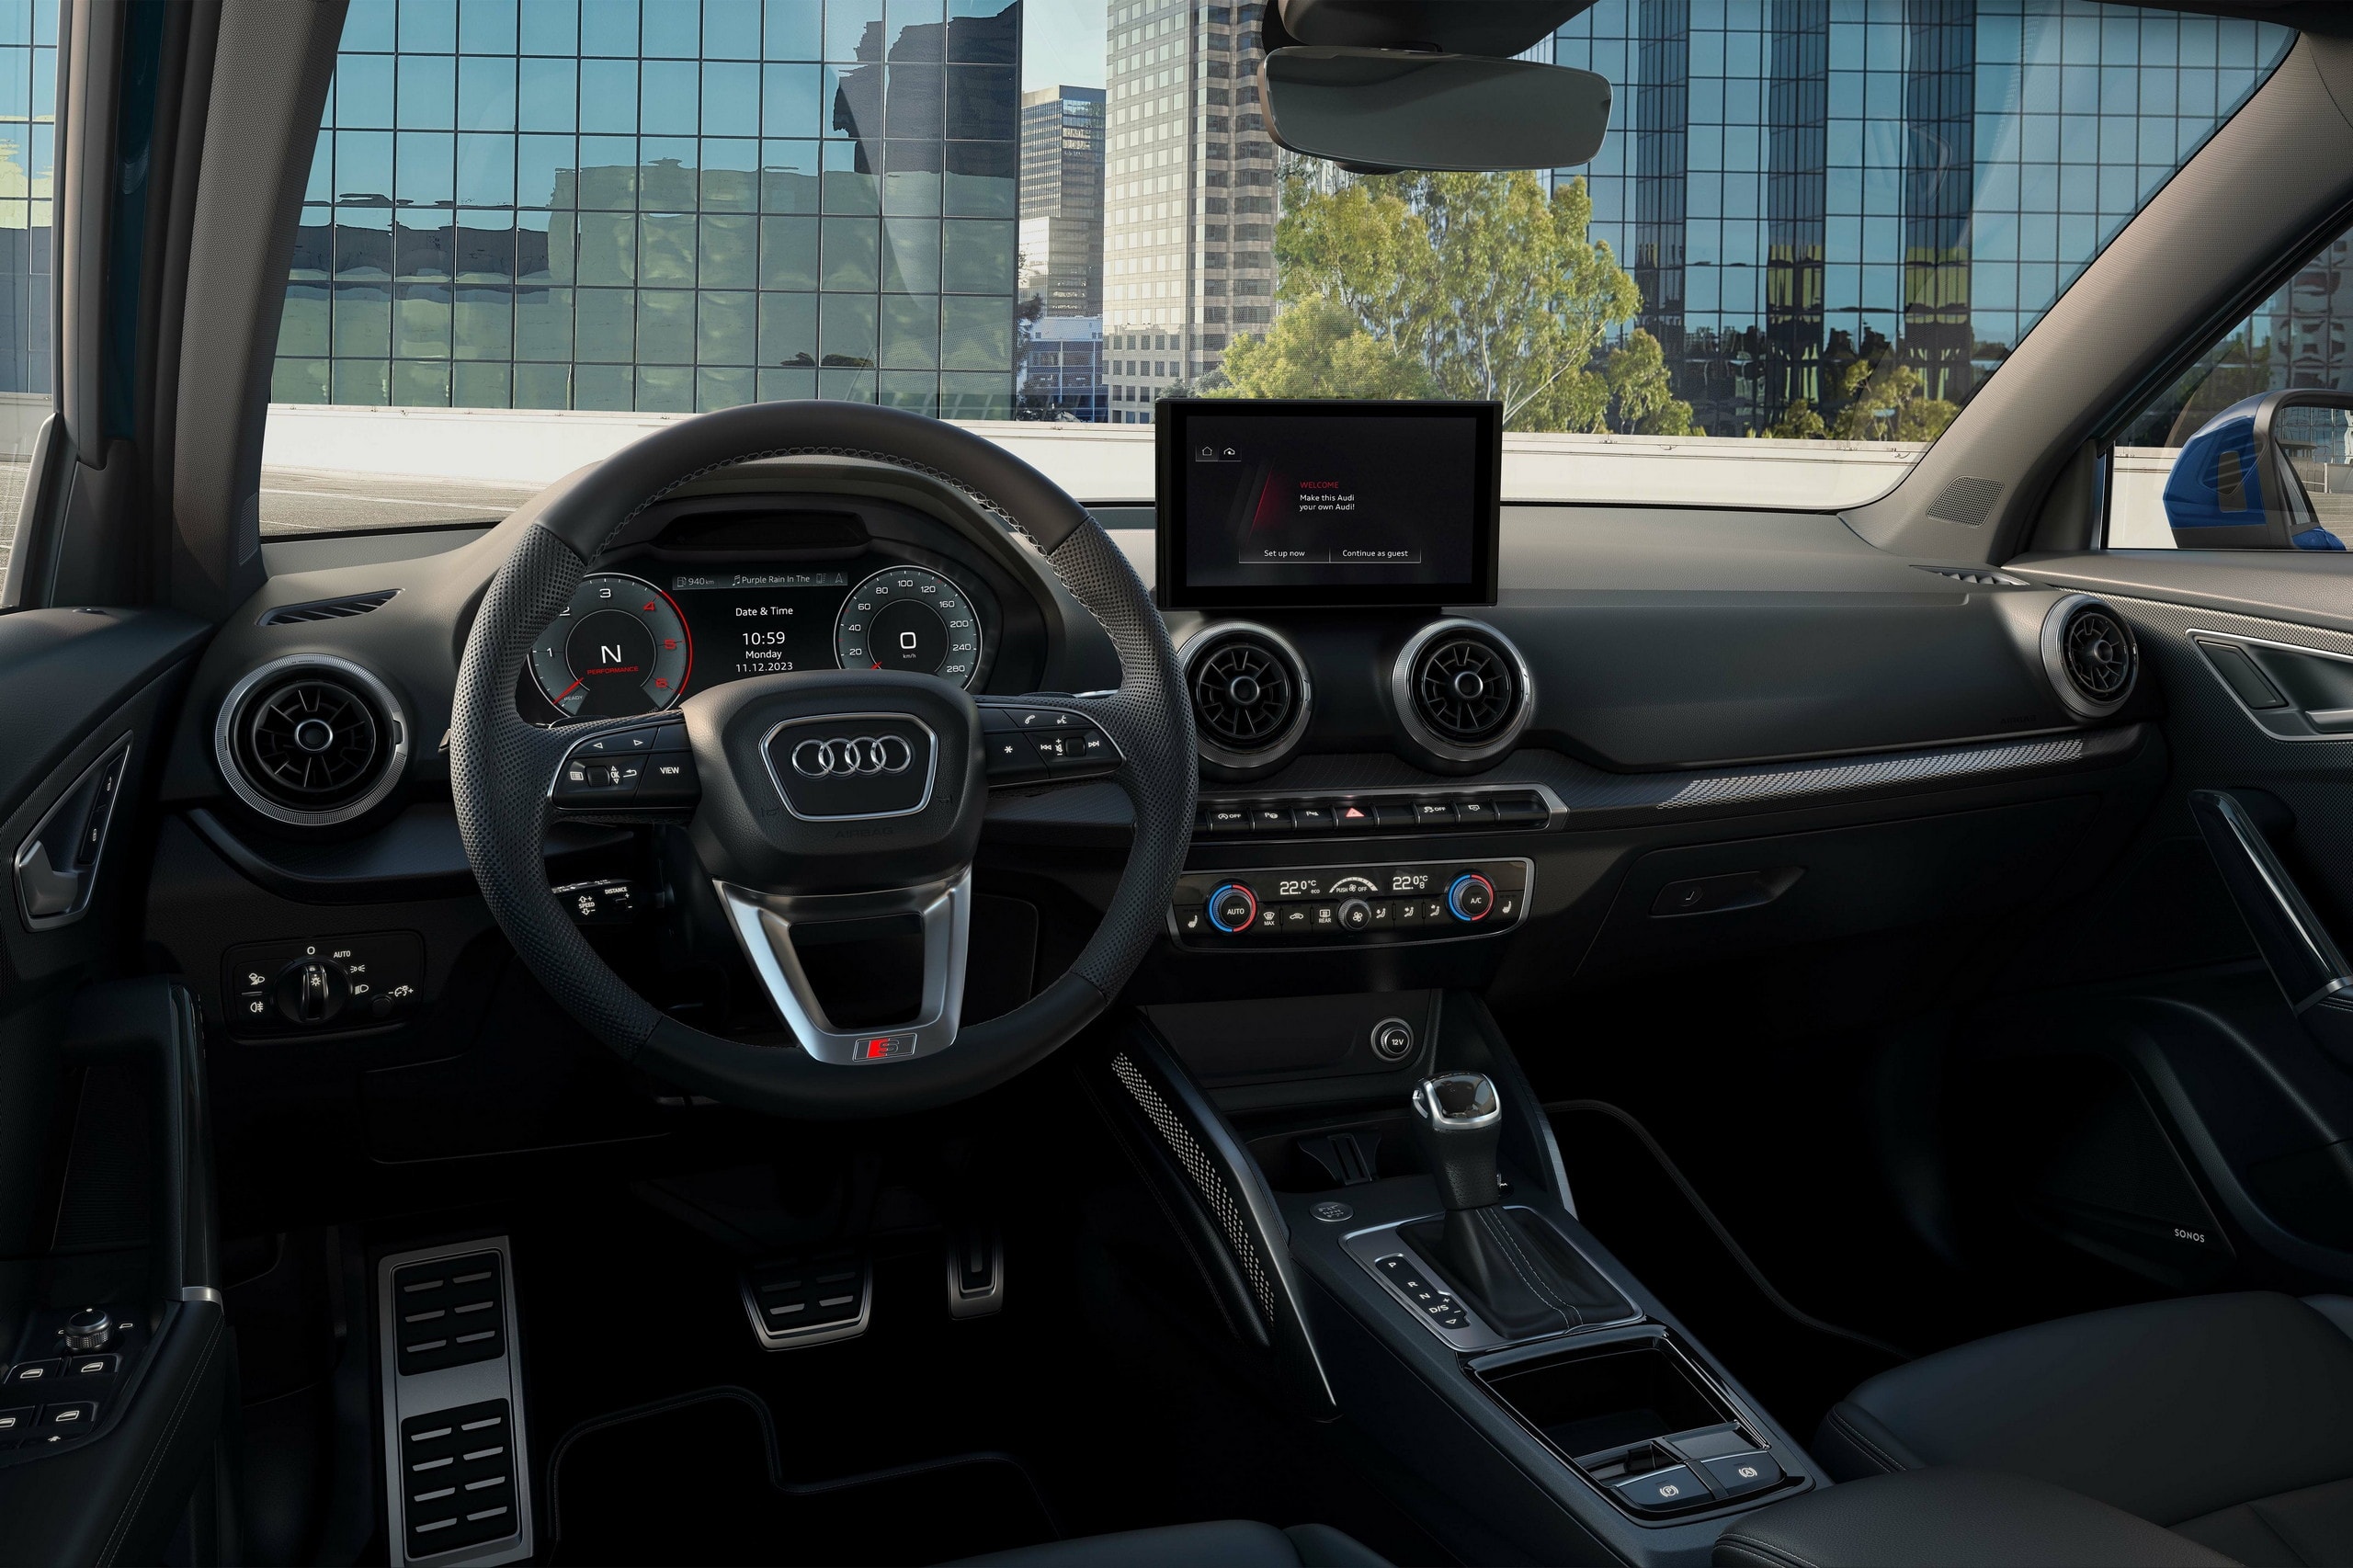 2024 Audi Q2 Update: Enhanced Features & Safety for Europe